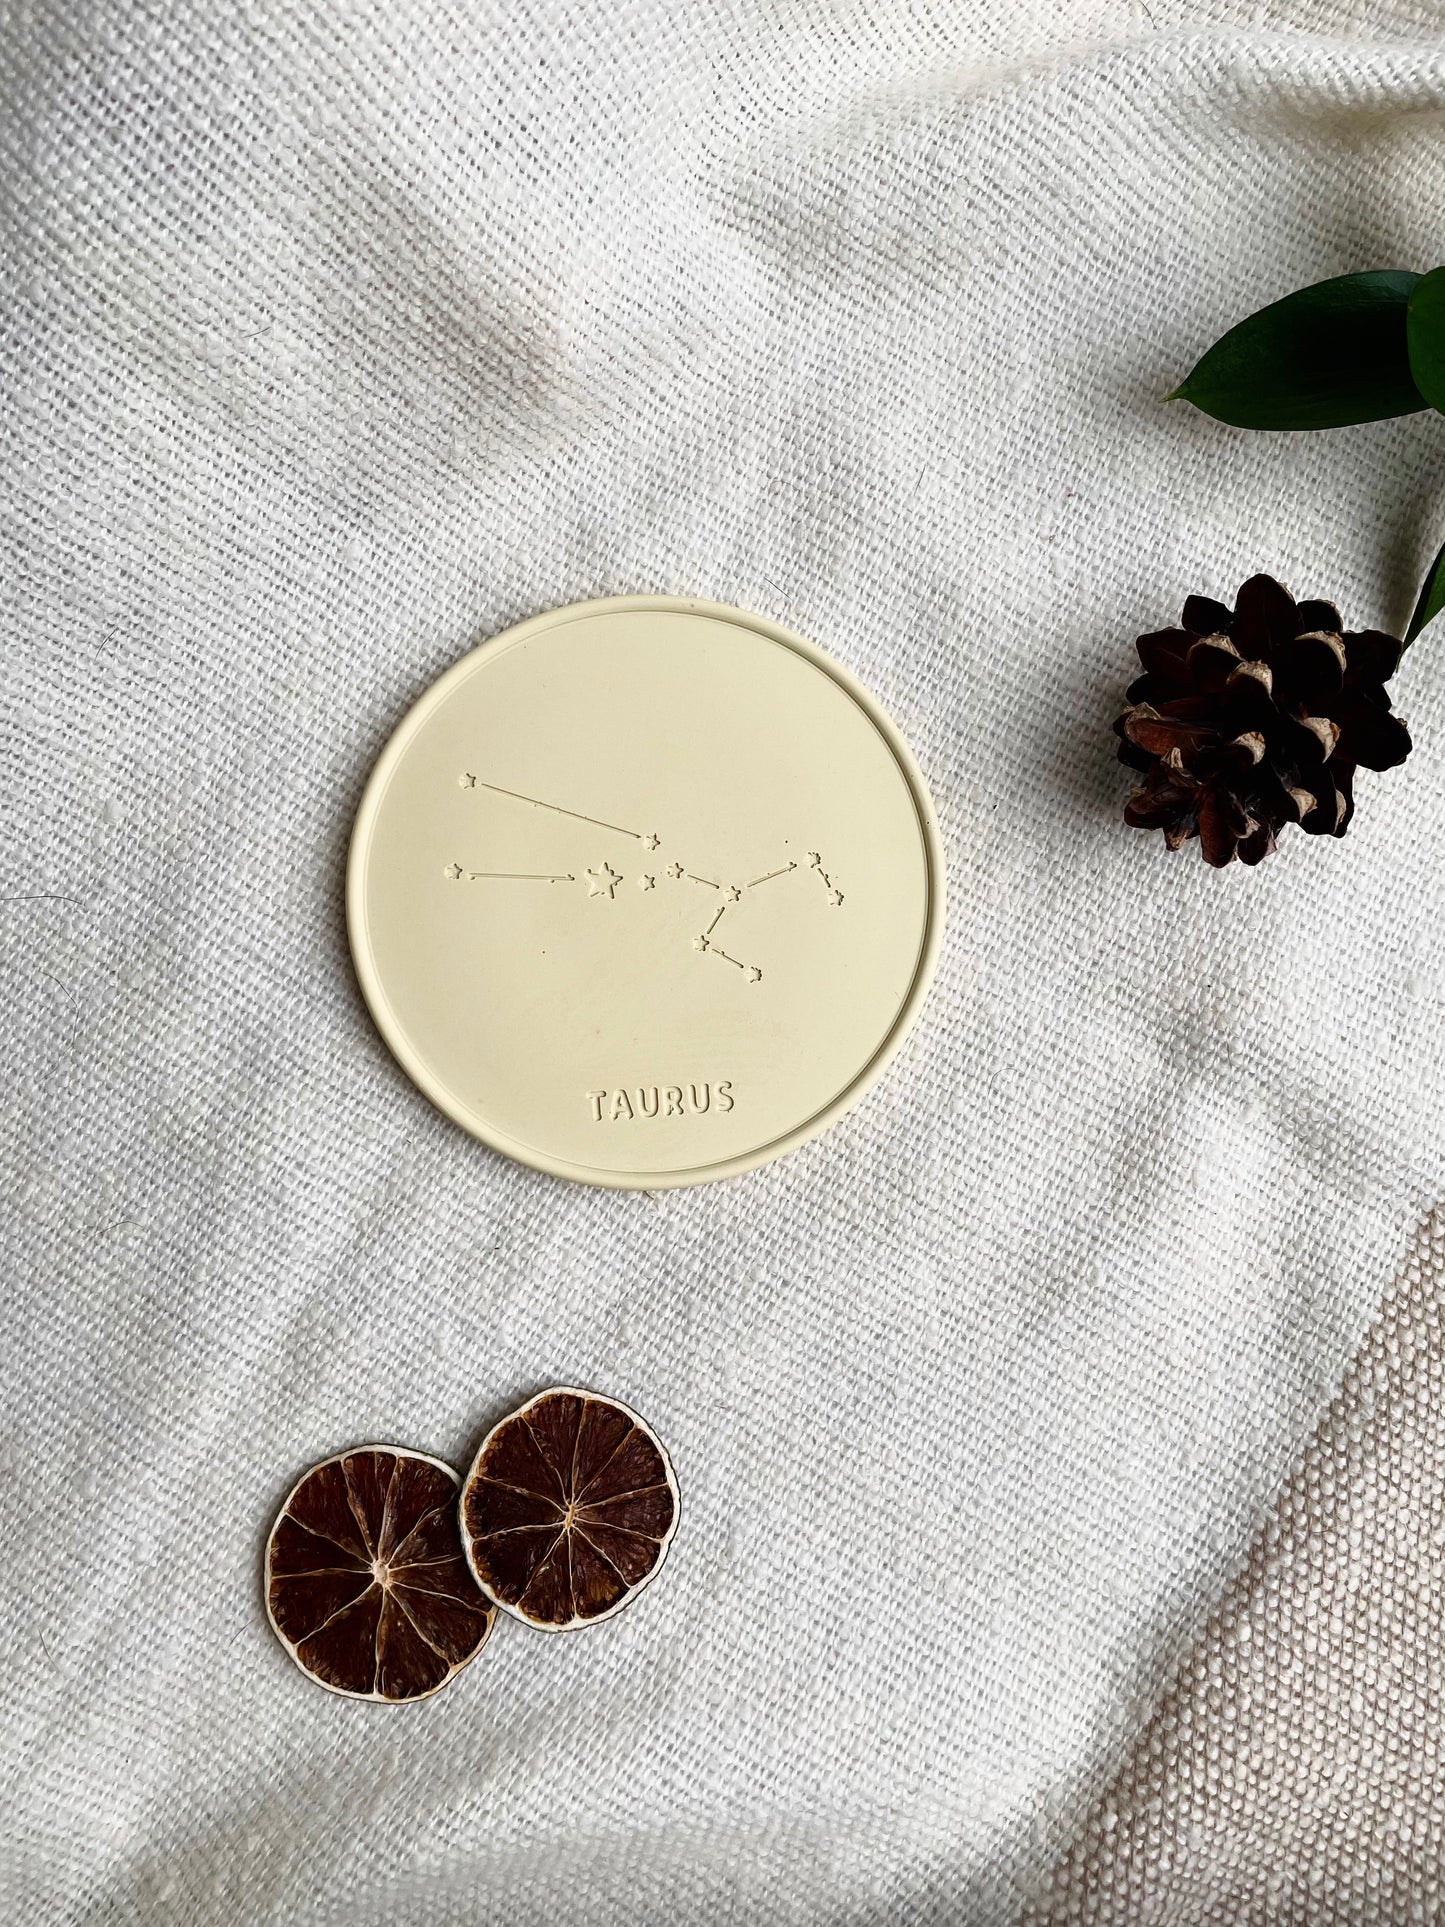 Astrology Constellation Tray